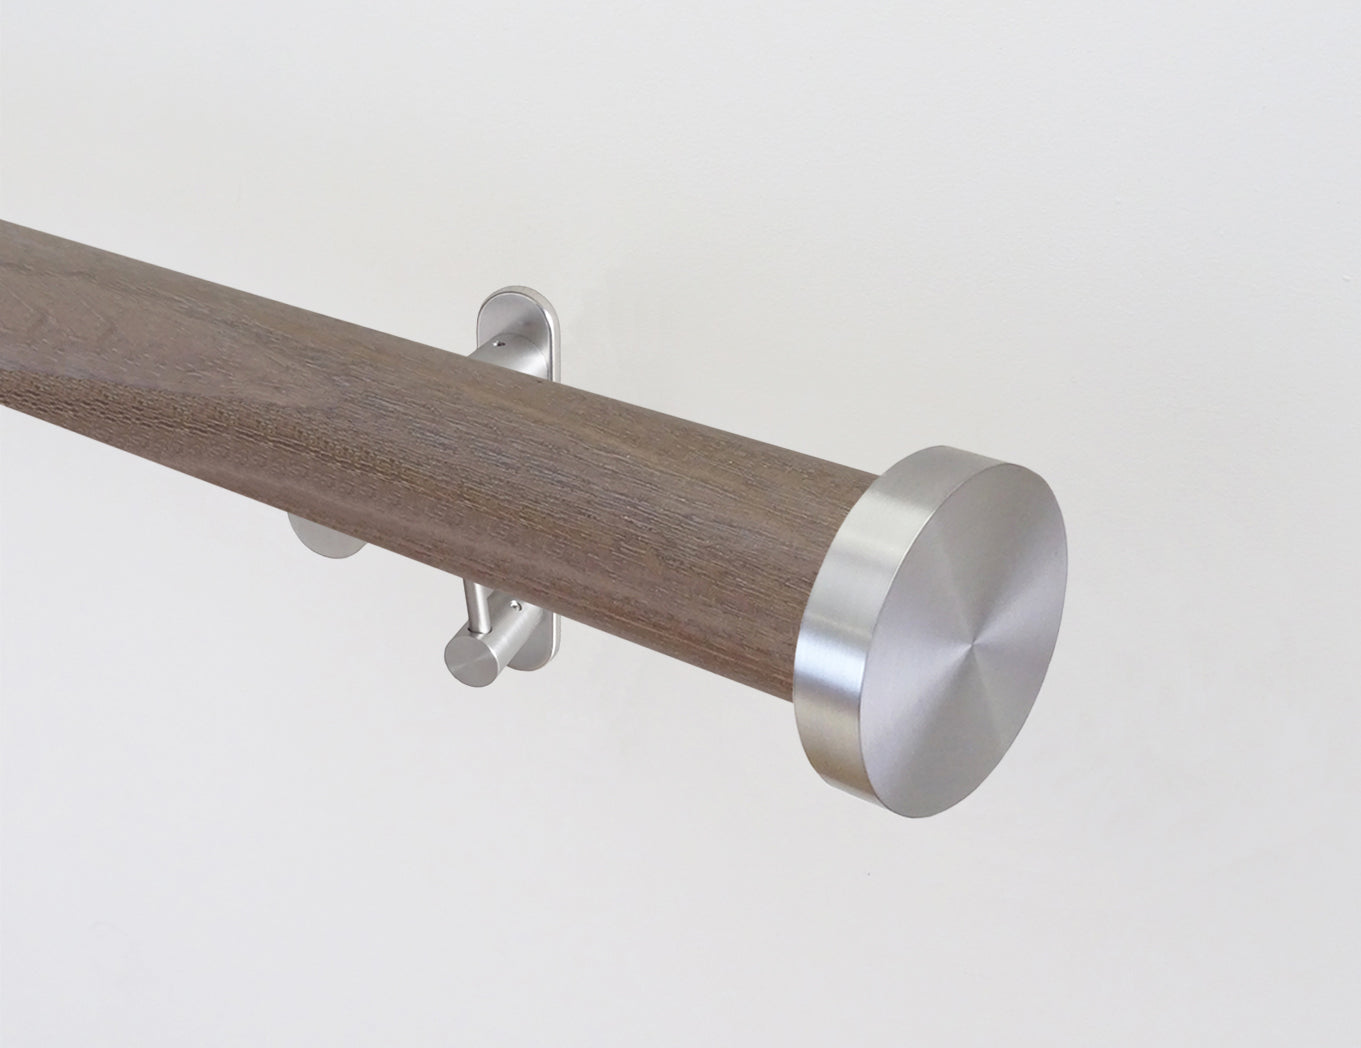 weathered oak stained wooden curtain pole by Walcot House